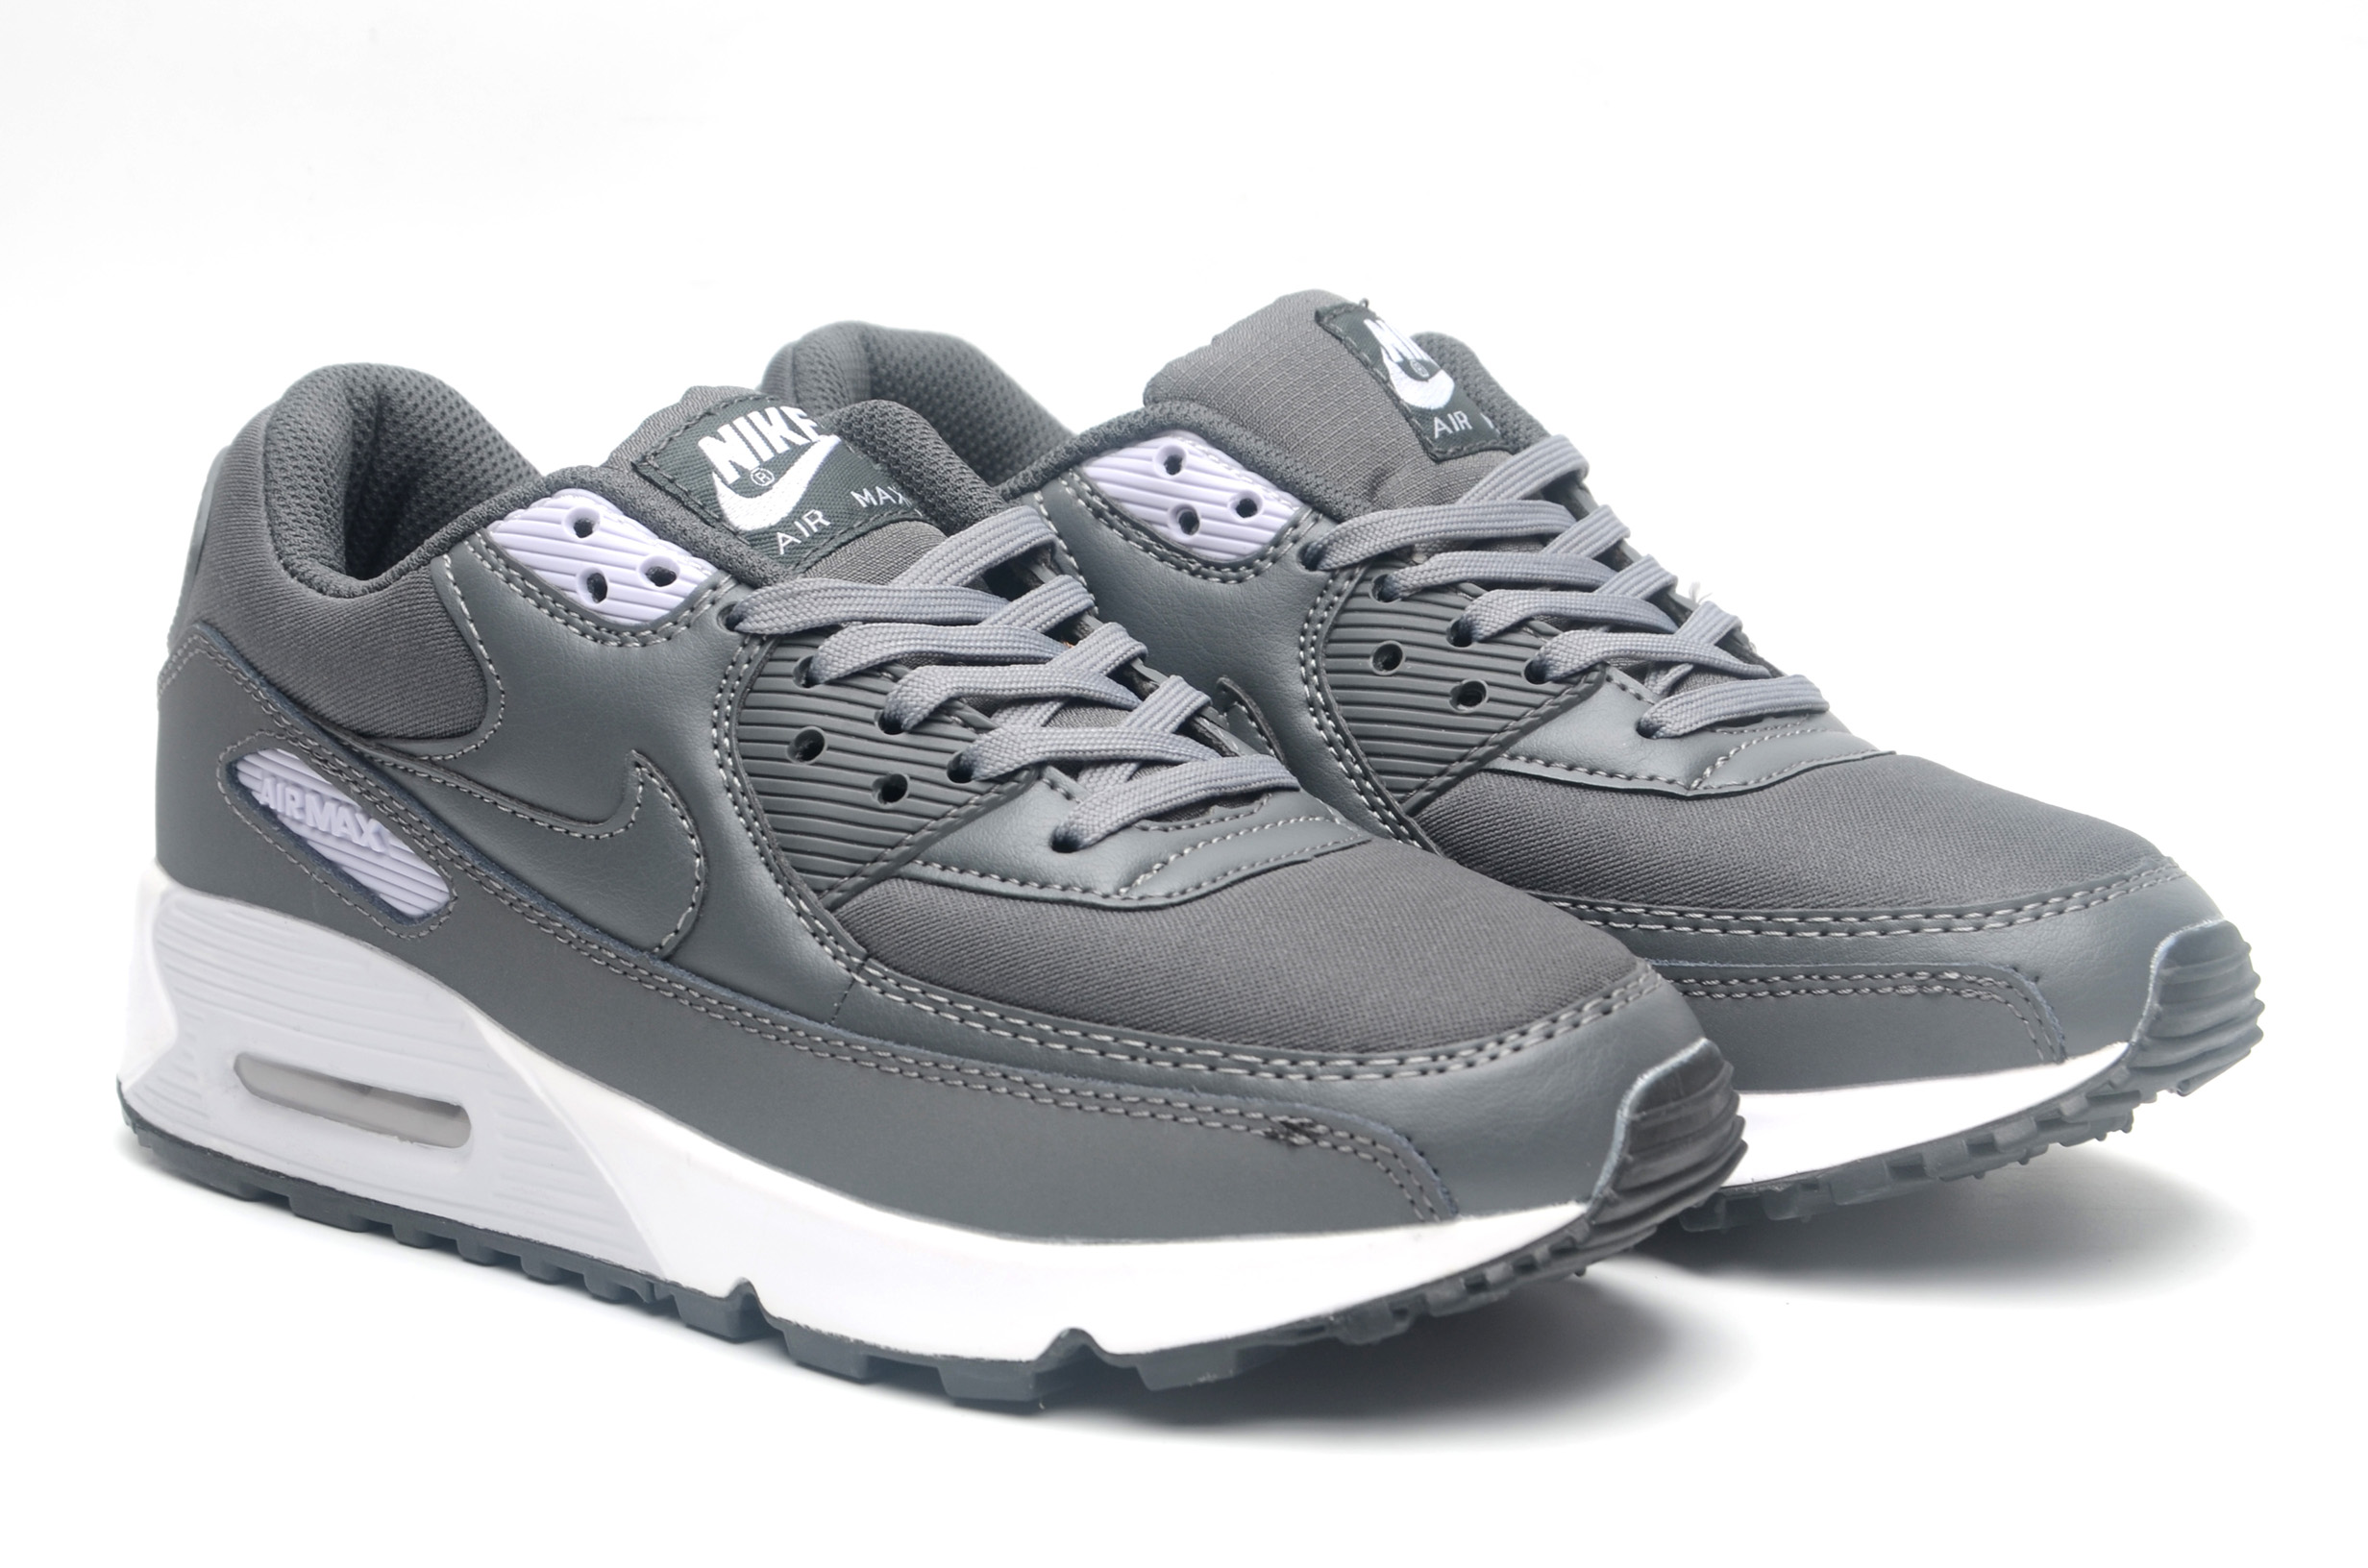 Men's Running weapon Air Max 90 Shoes 041